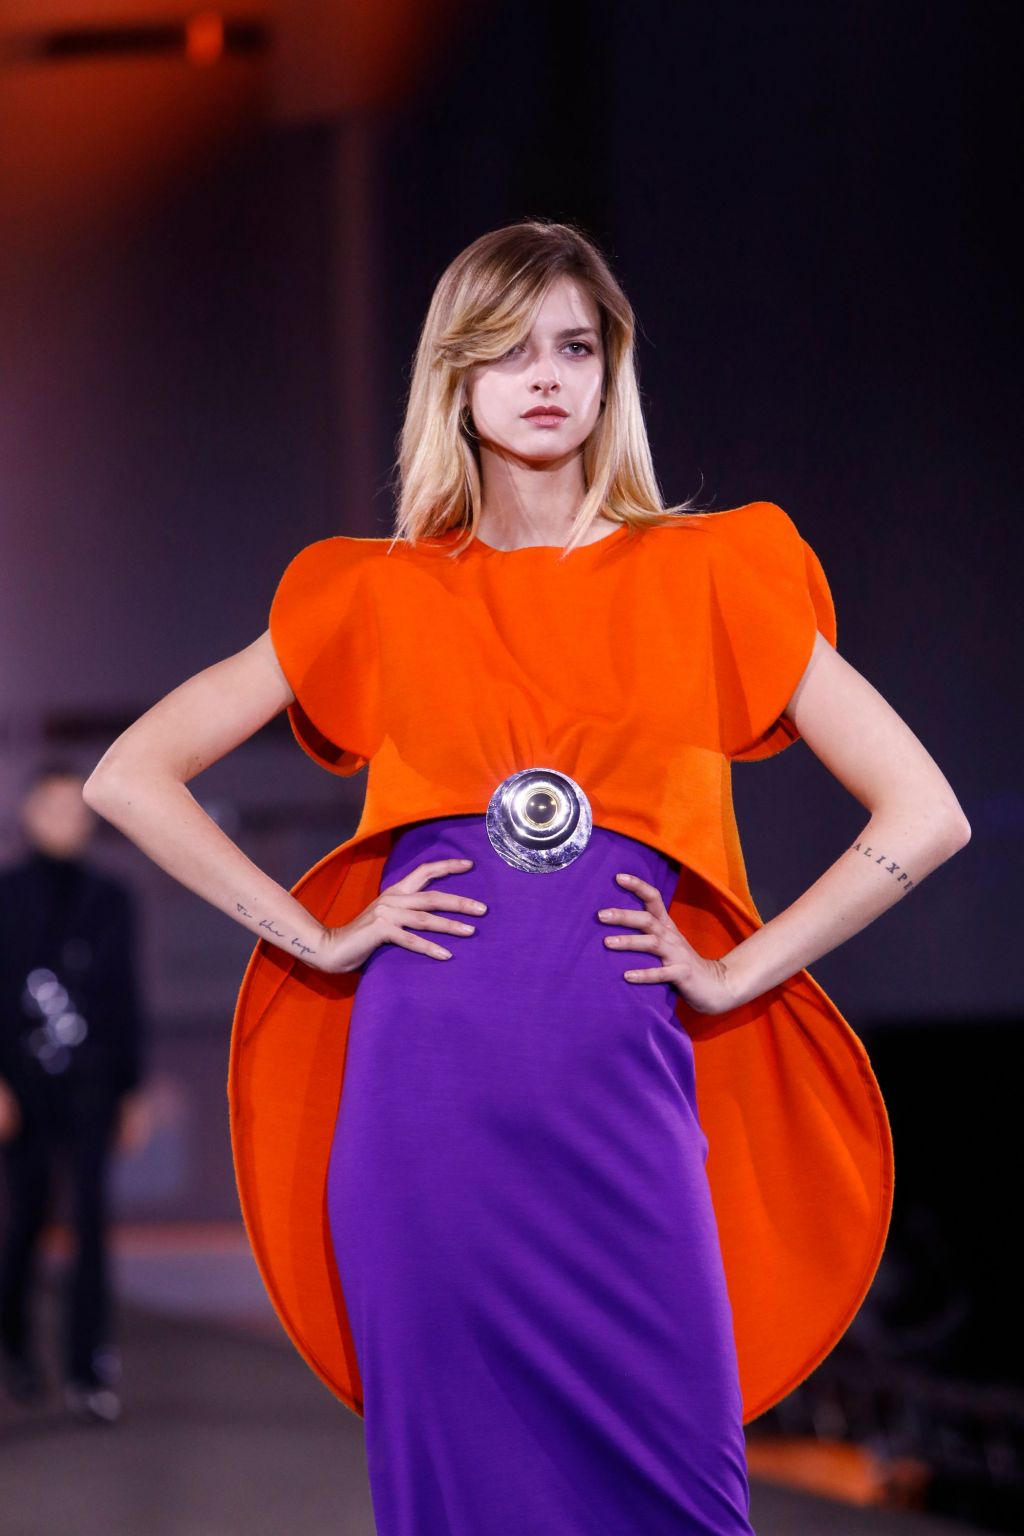 Pierre Cardin Fashion Show - COSMOCORPS 3022